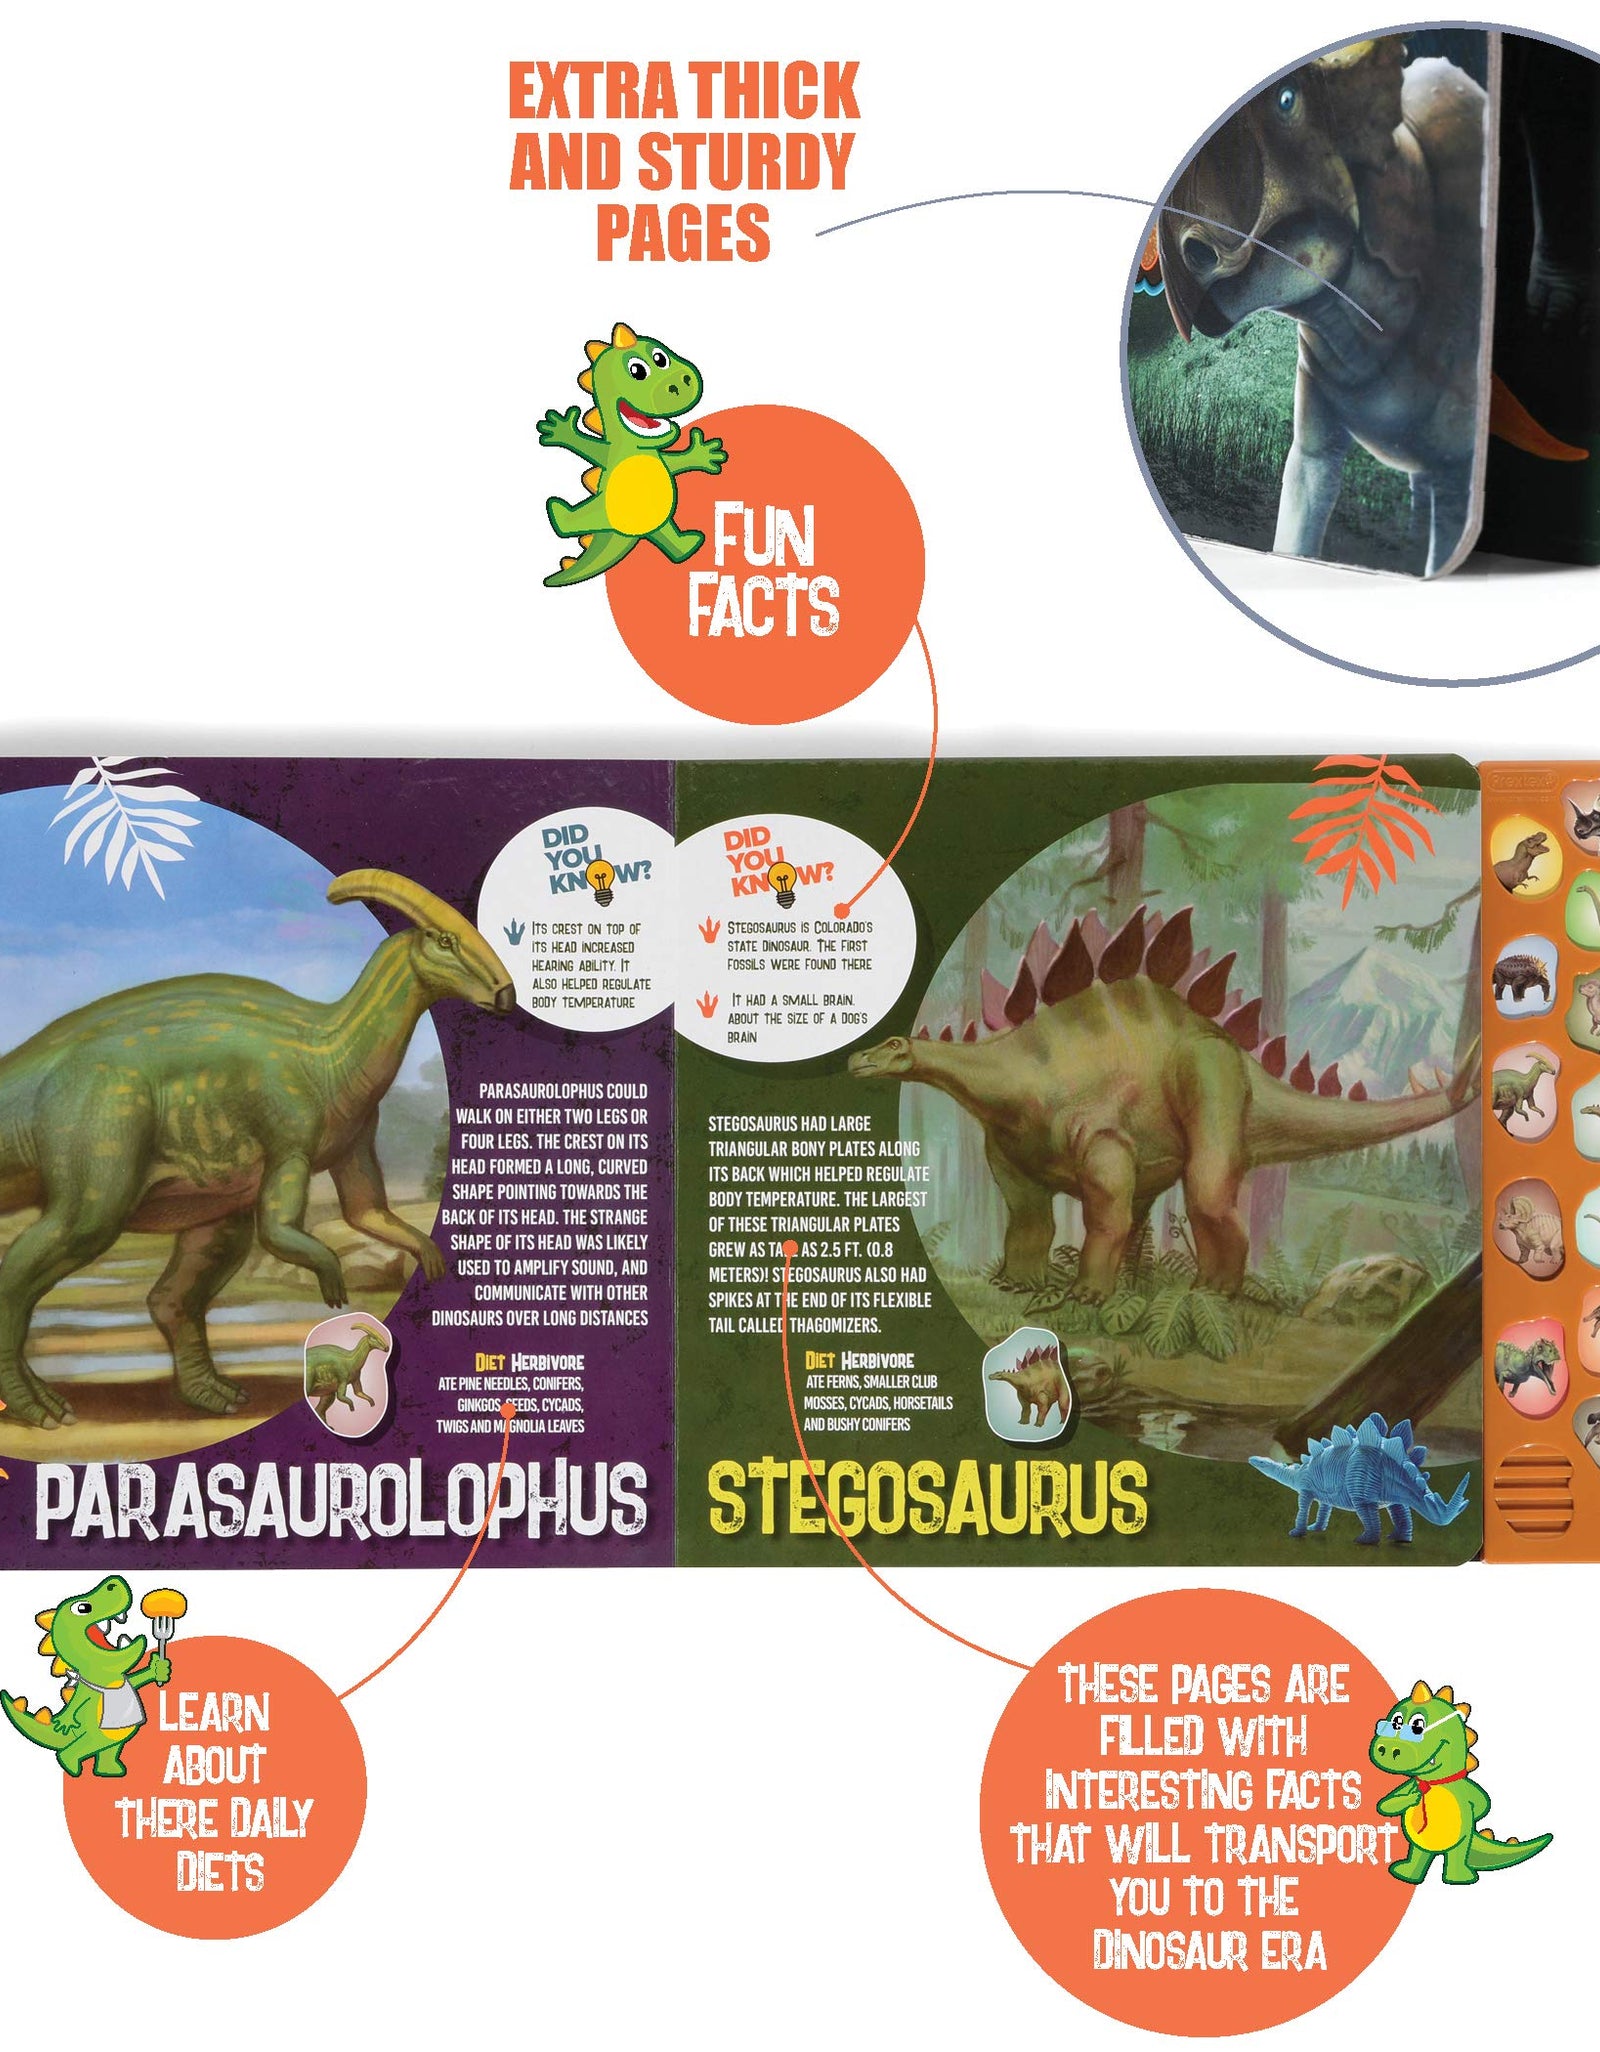 Prextex Realistic Looking Dinosaur With Interactive Dinosaur Sound Book - Pack of 12 Animal Dinosaur Figures with Illustrated Dinosaur Sound Book Toys for Boys and Girls 3 Years Old & Up